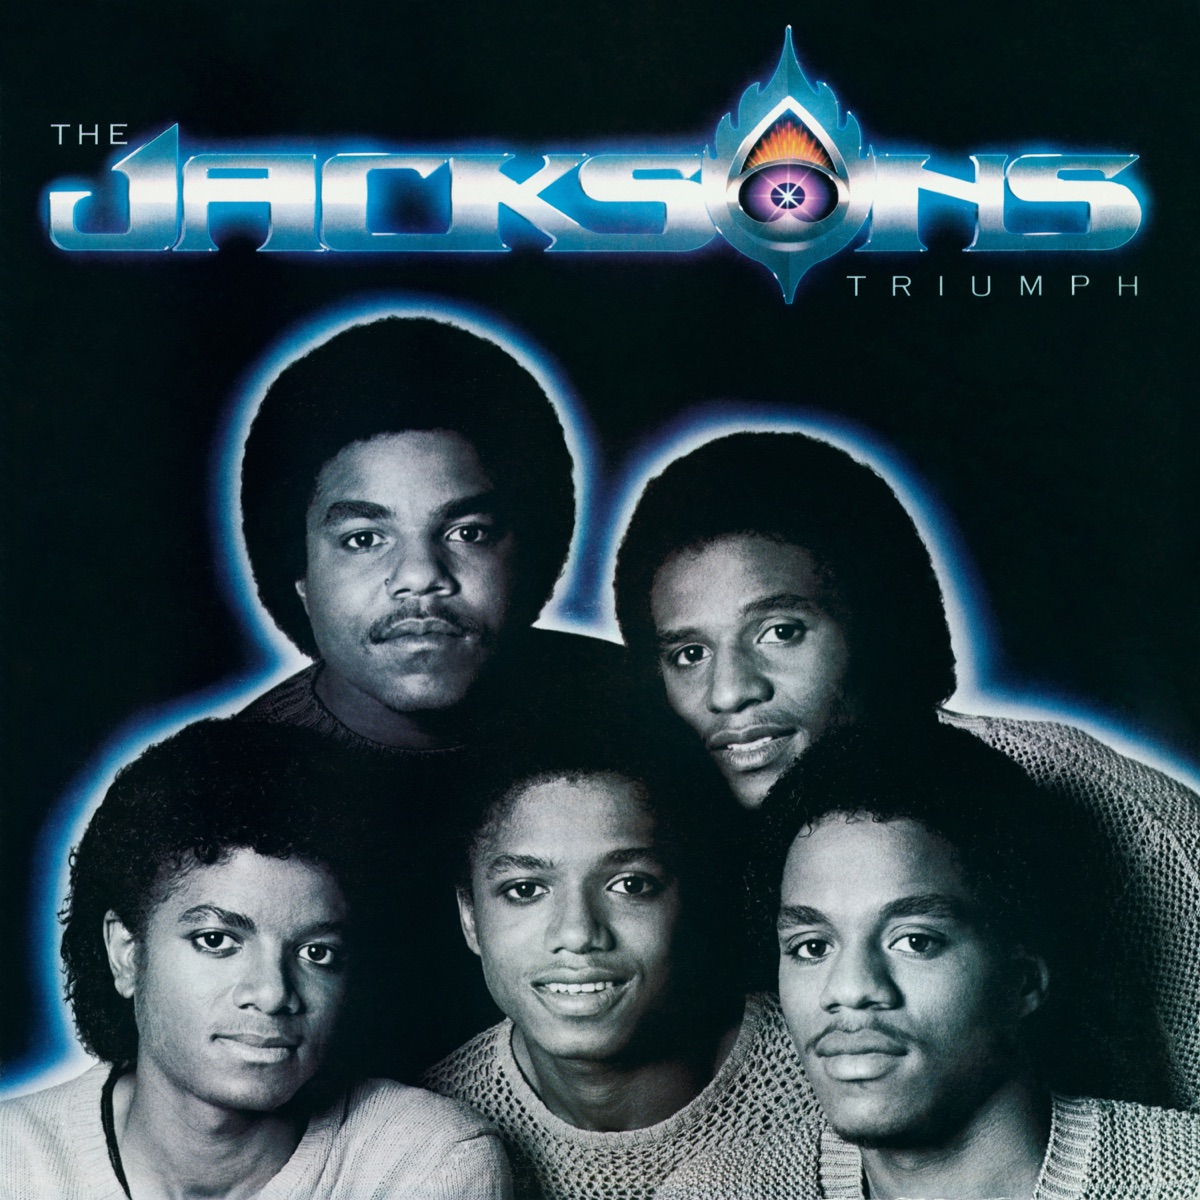 Triumph by The Jacksons on Apple Music